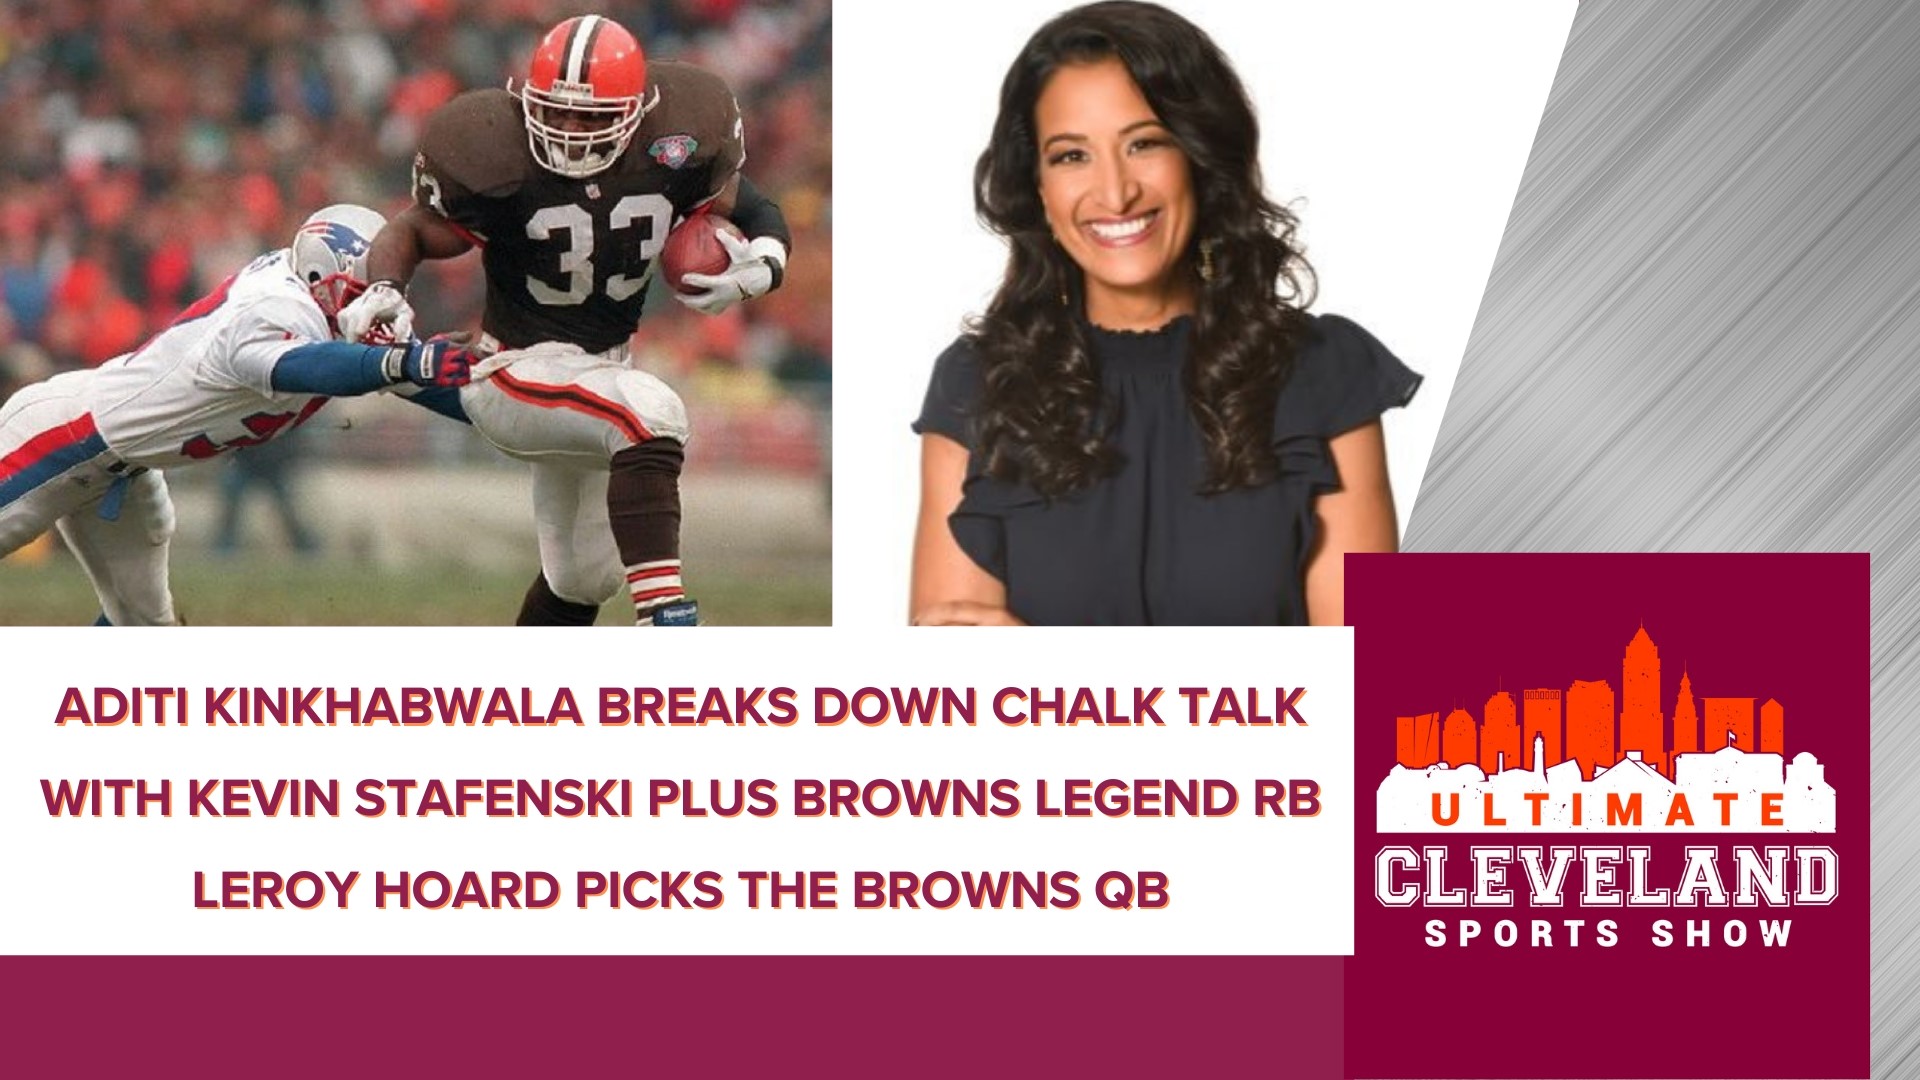 Aditi gives UCSS insight into Kevin Stefanski's chalk talk, she mentions he likes the 1-2 punch between Chubb & Hunt. Leroy Hoard speaks on Baker Mayfield's health.